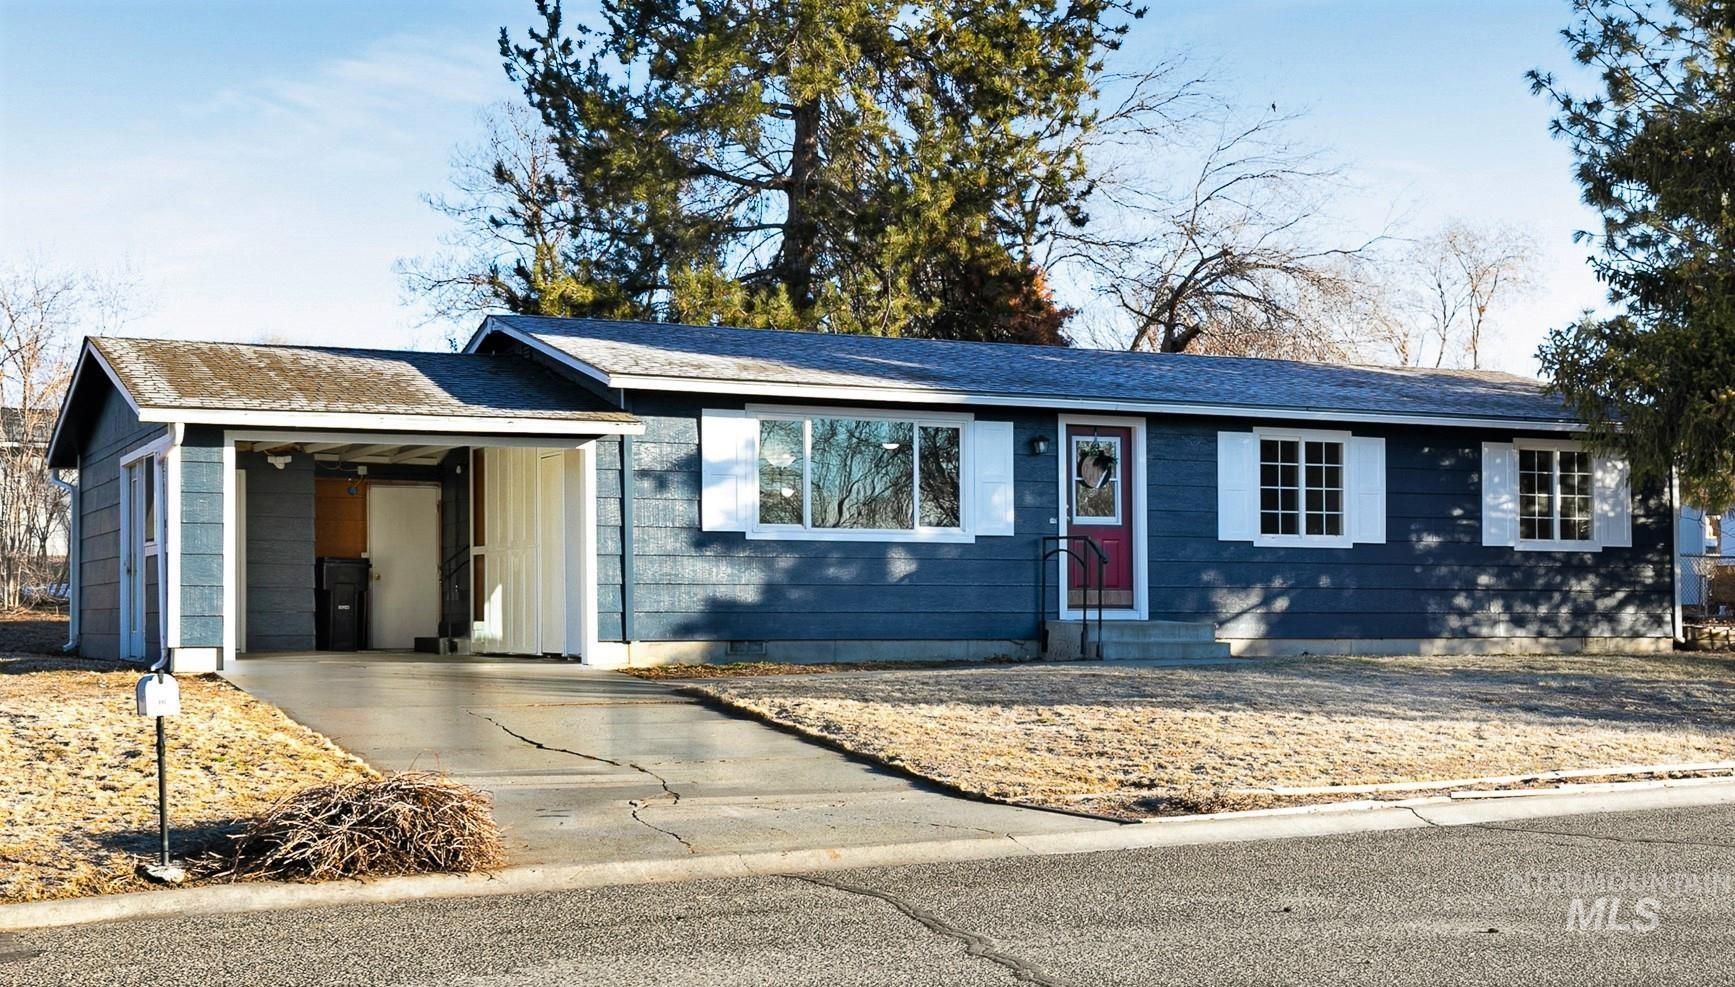 690 Arrow Dr, Weiser, Idaho 83672, 3 Bedrooms, 1 Bathroom, Residential For Sale, Price $255,000, 98868777